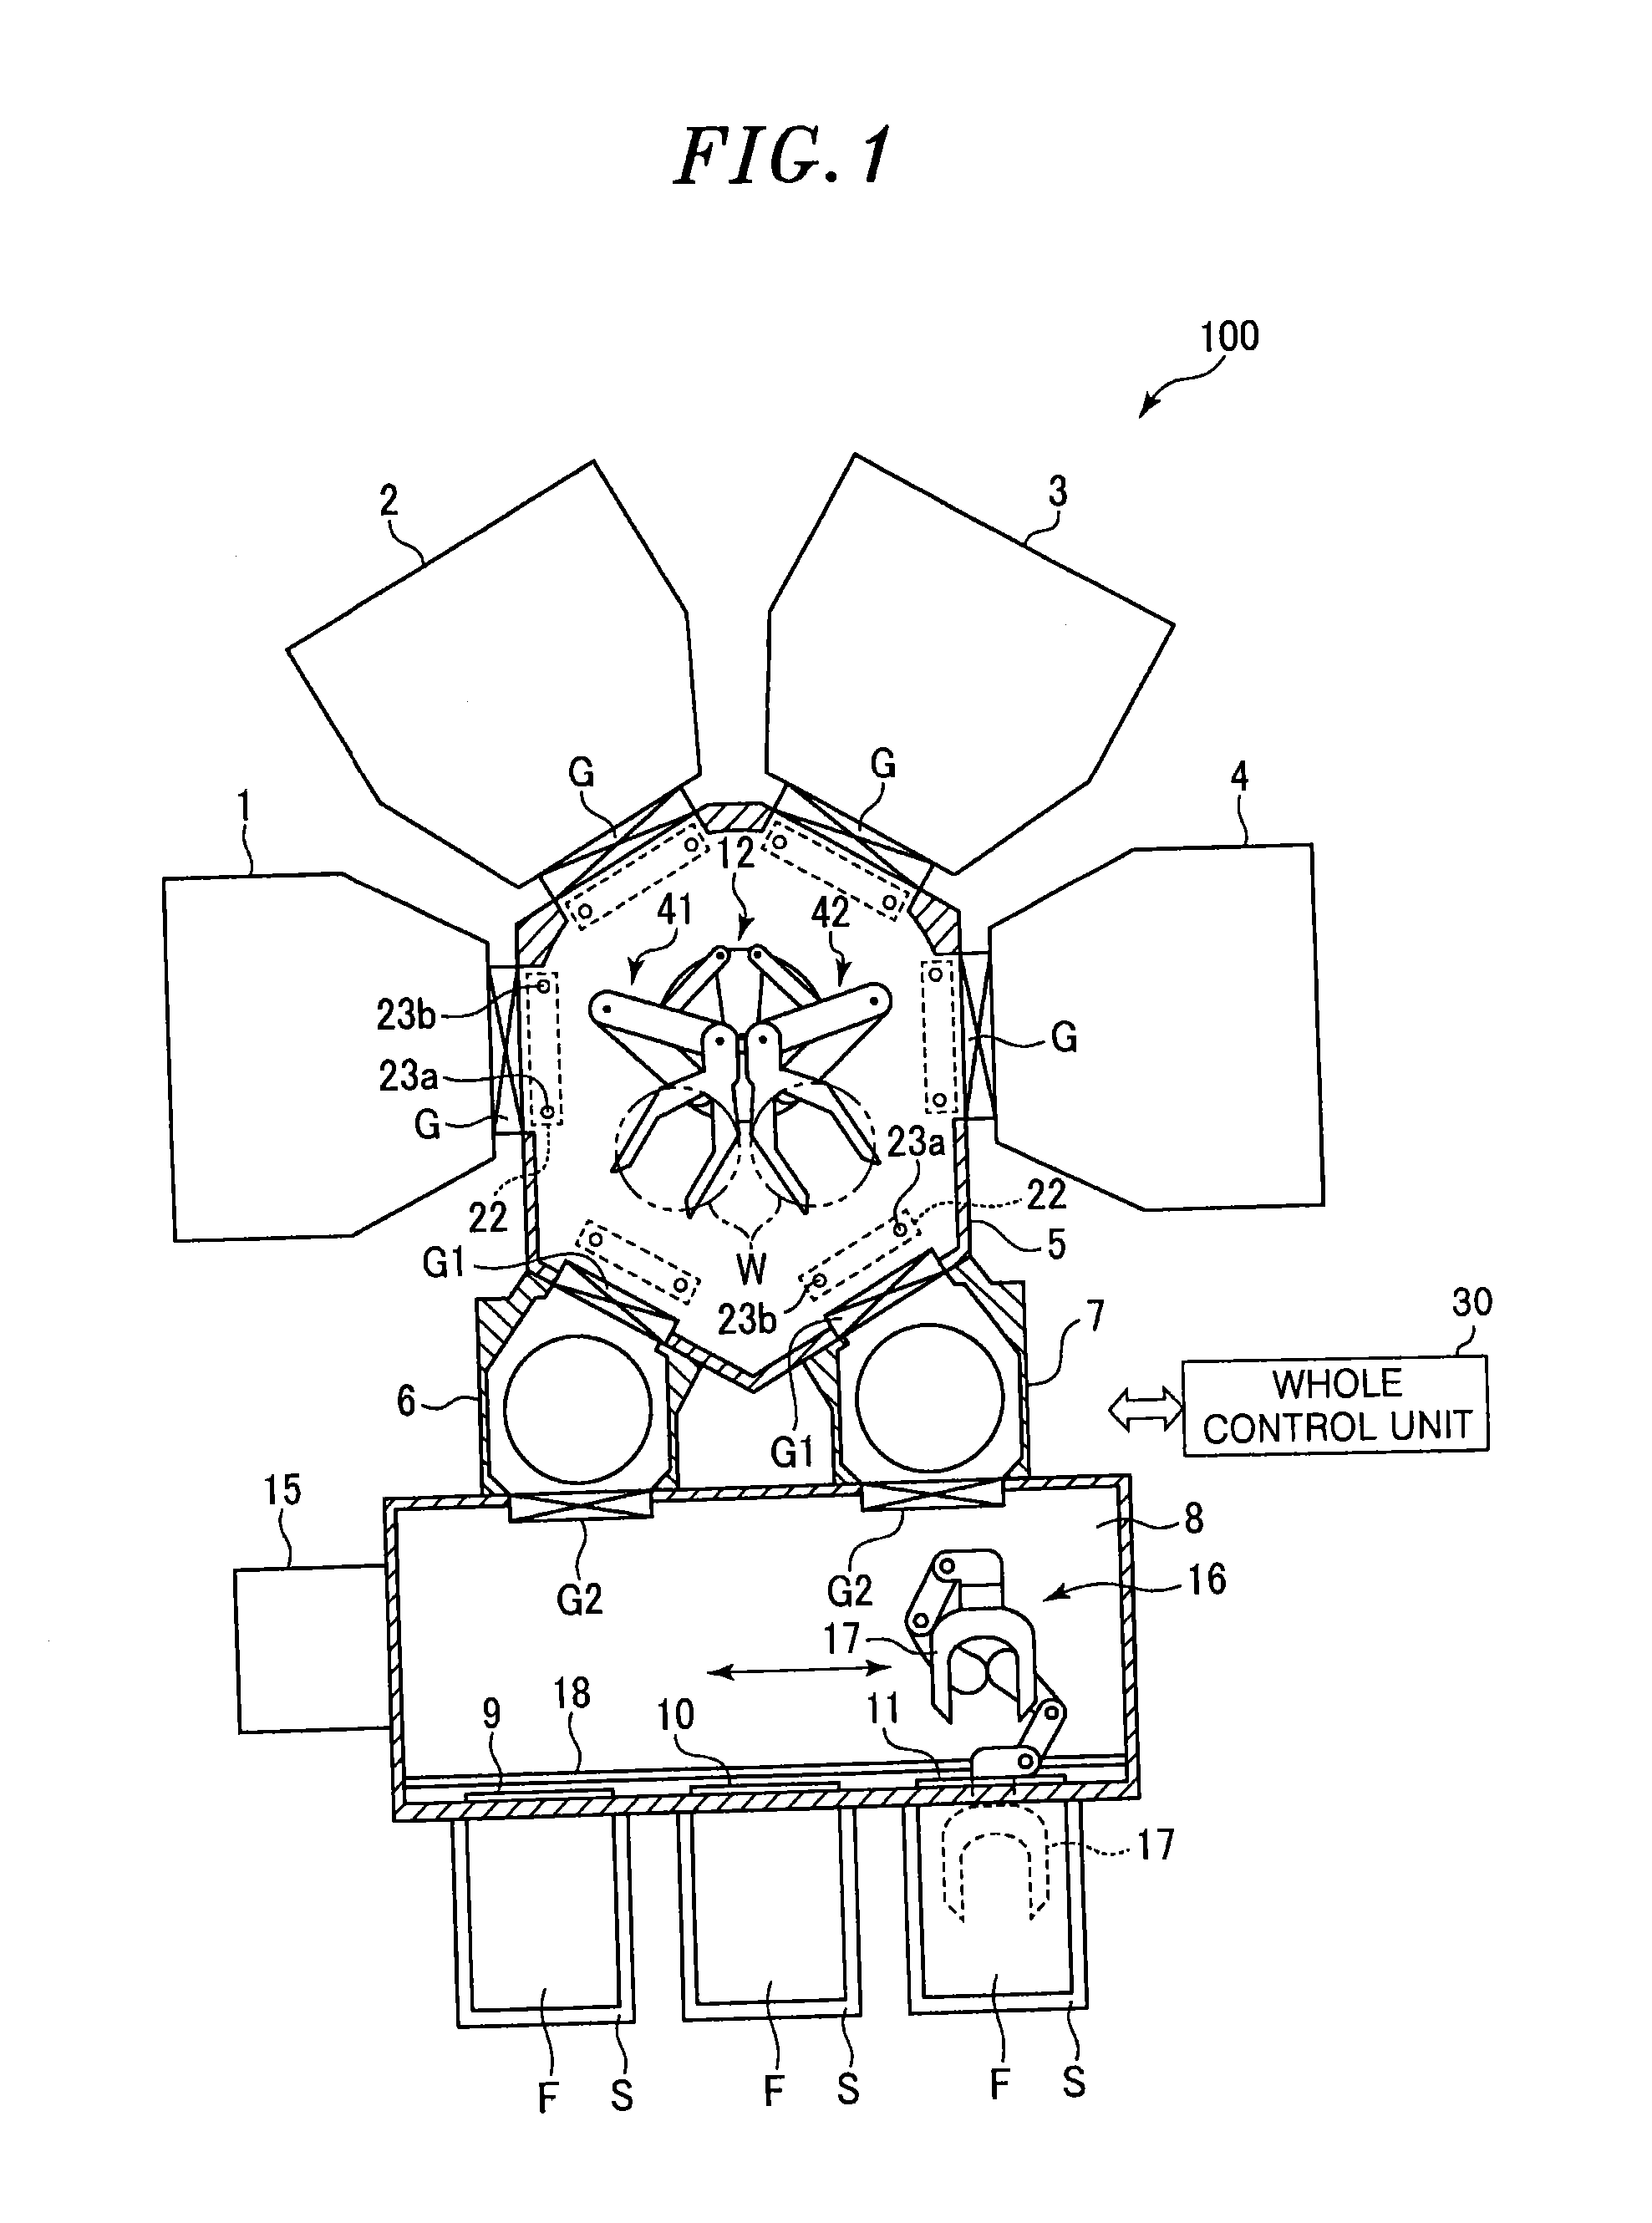 Substrate transfer device and substrate processing system